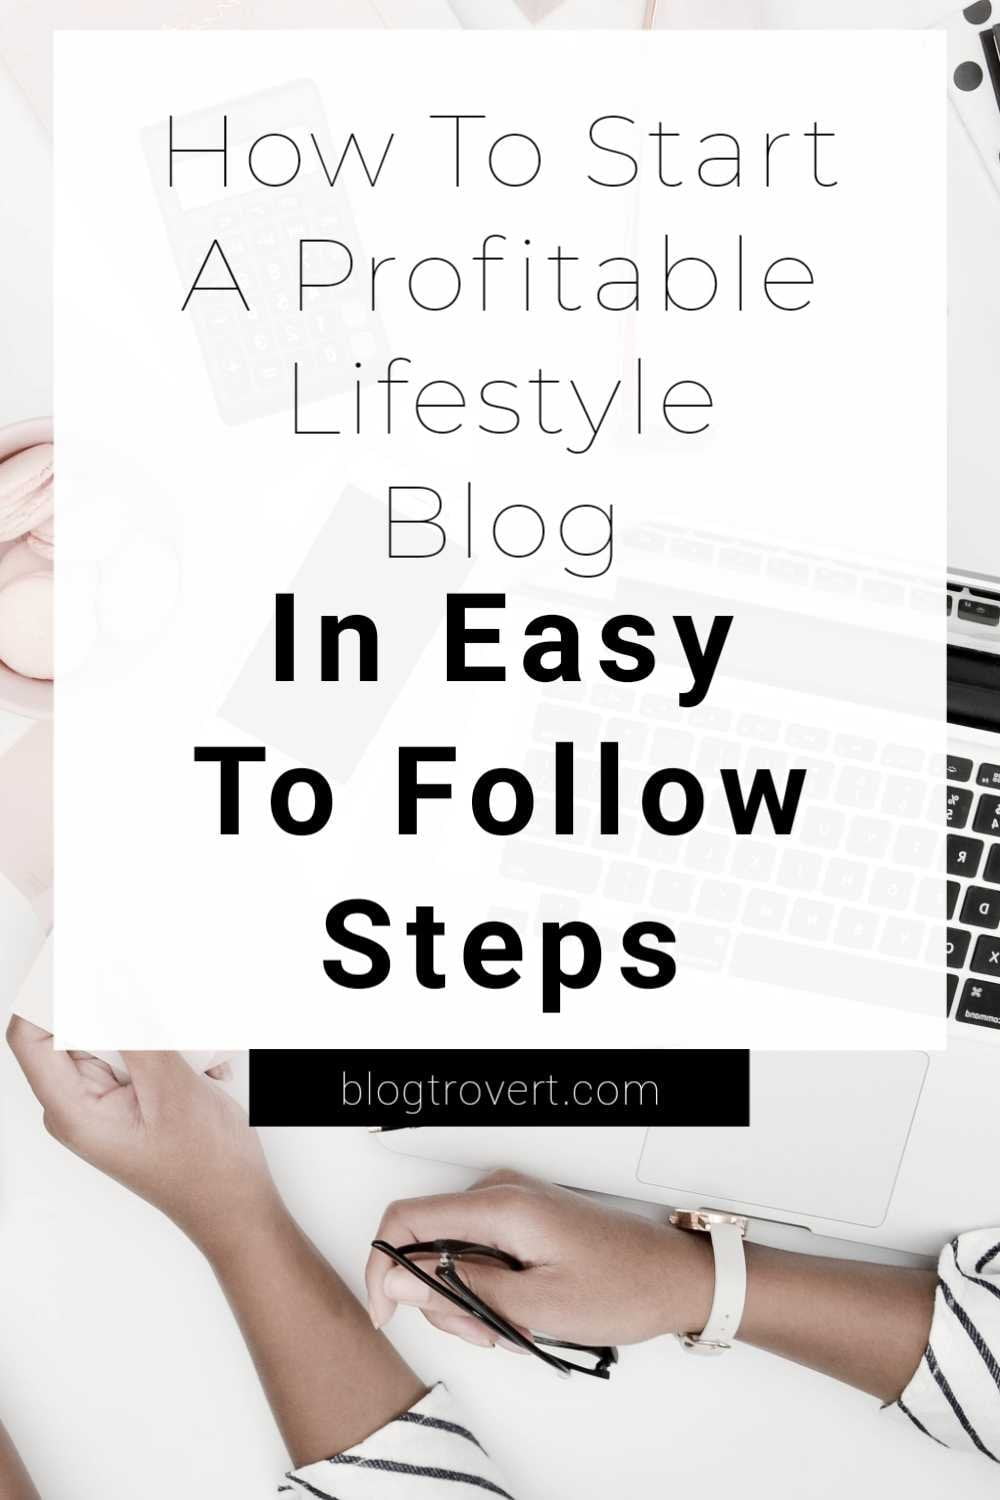 How to Start a lifestyle blog and make money